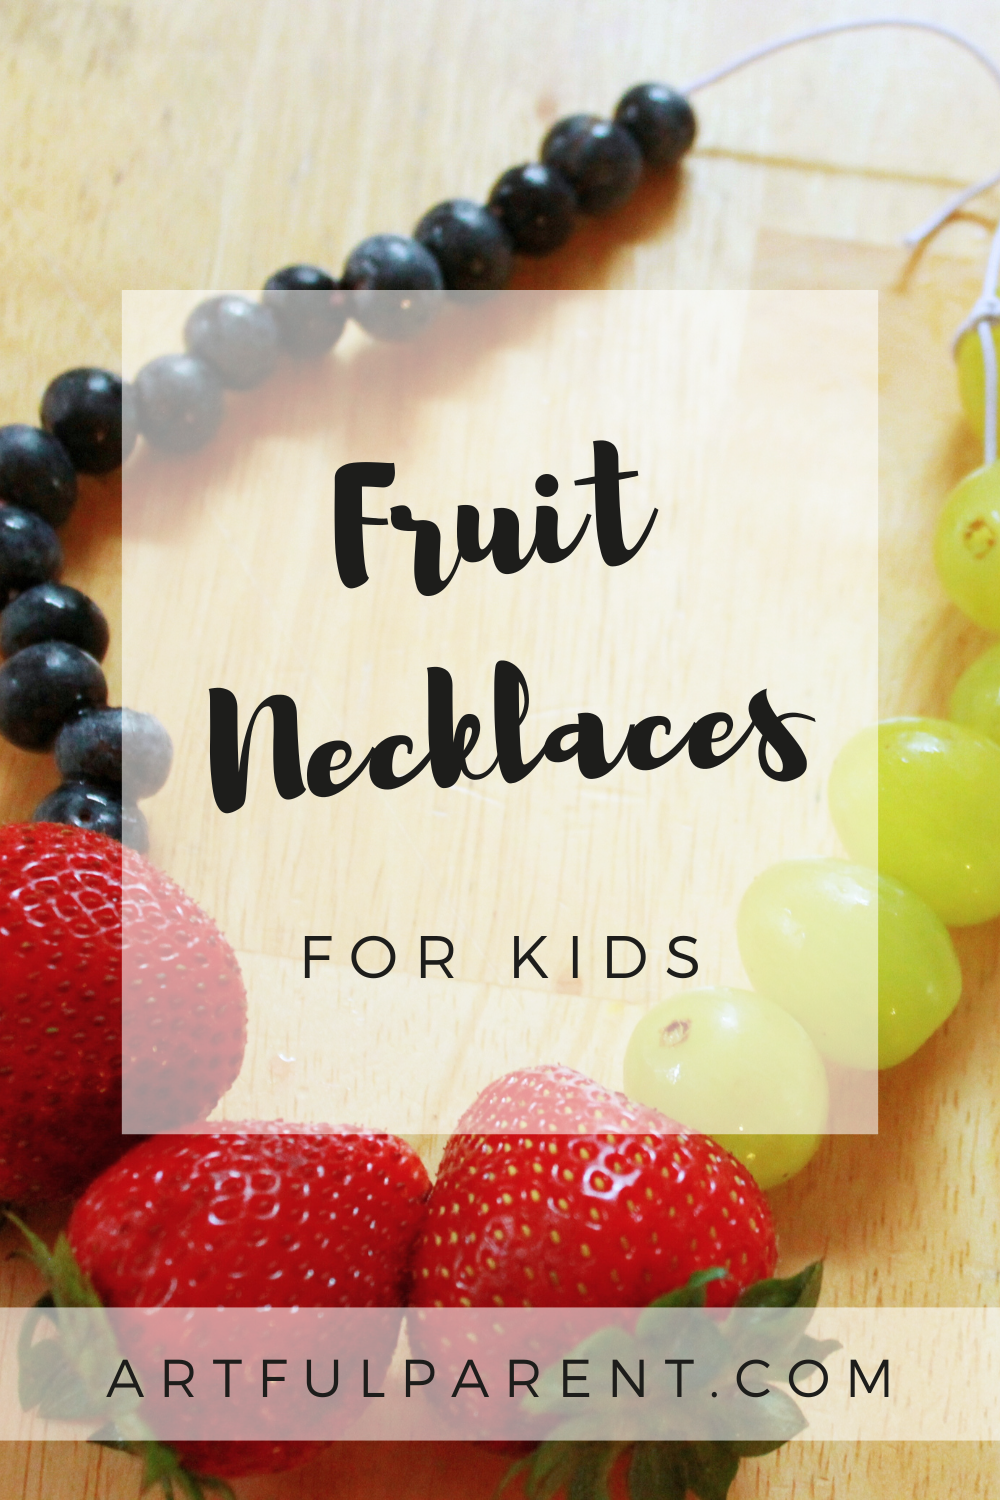 How to Make a Fruit Necklace for Kids